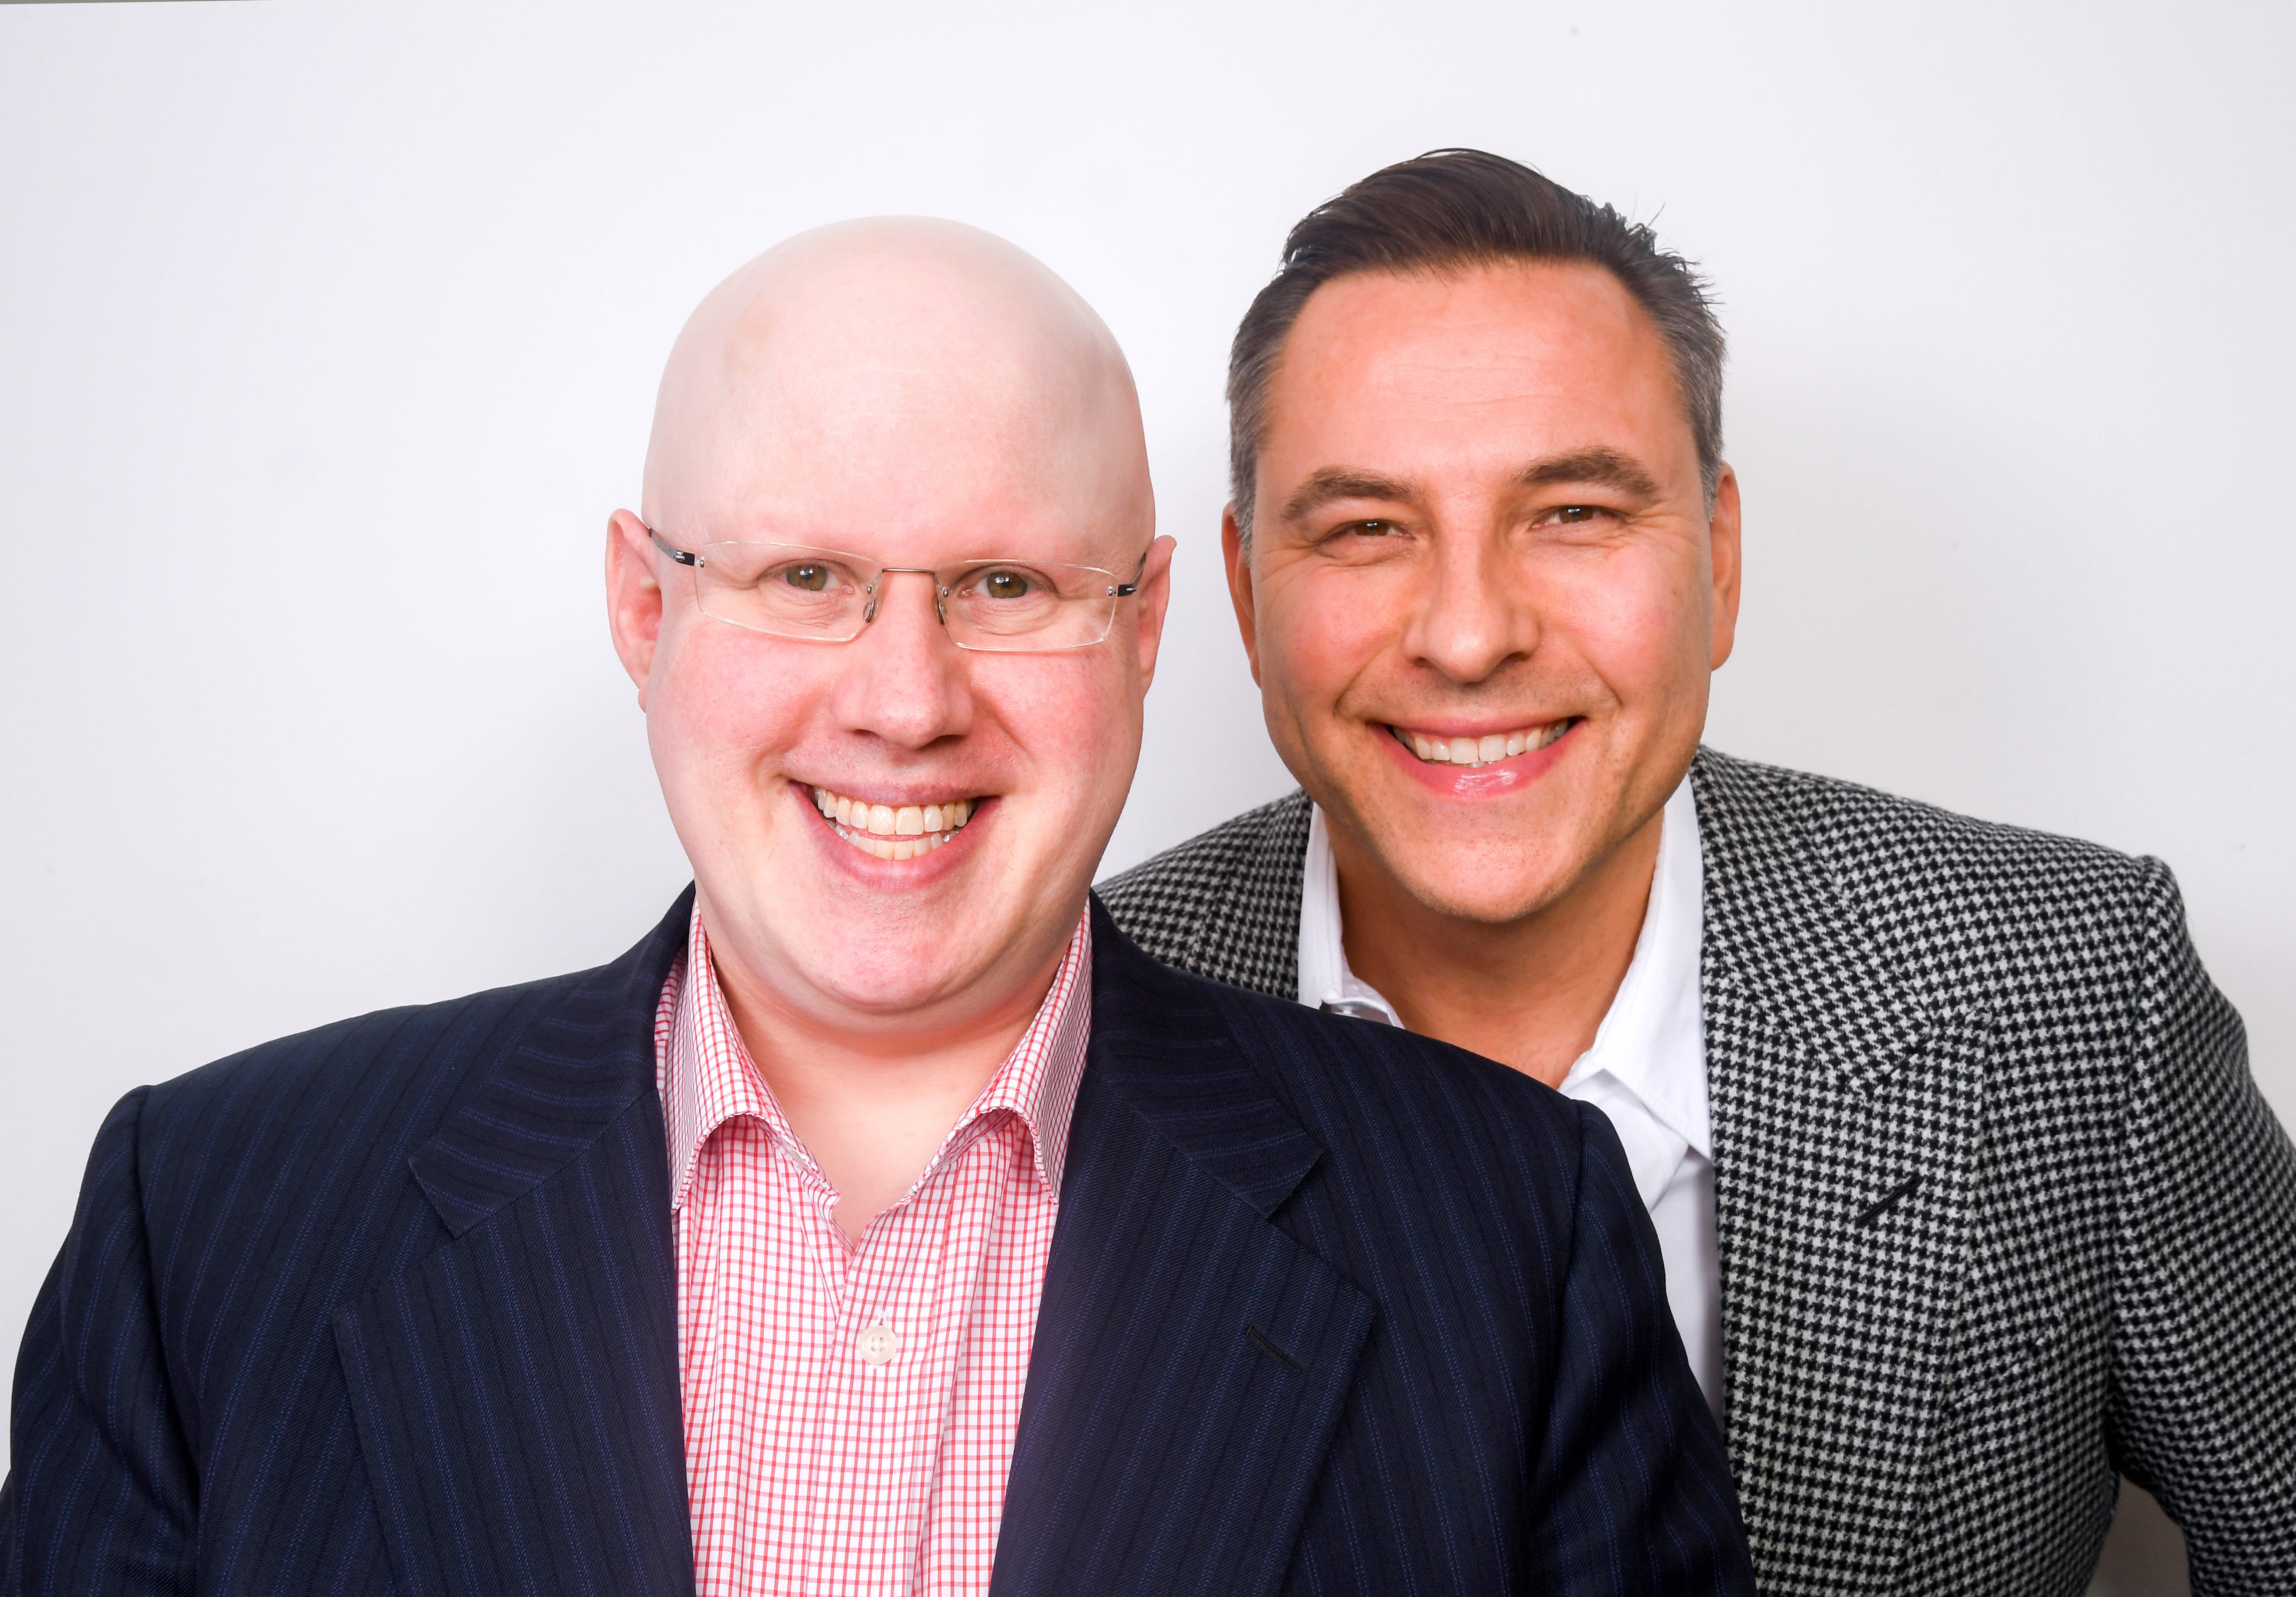 What we know about David Walliams and Matt Lucas’s new TV show